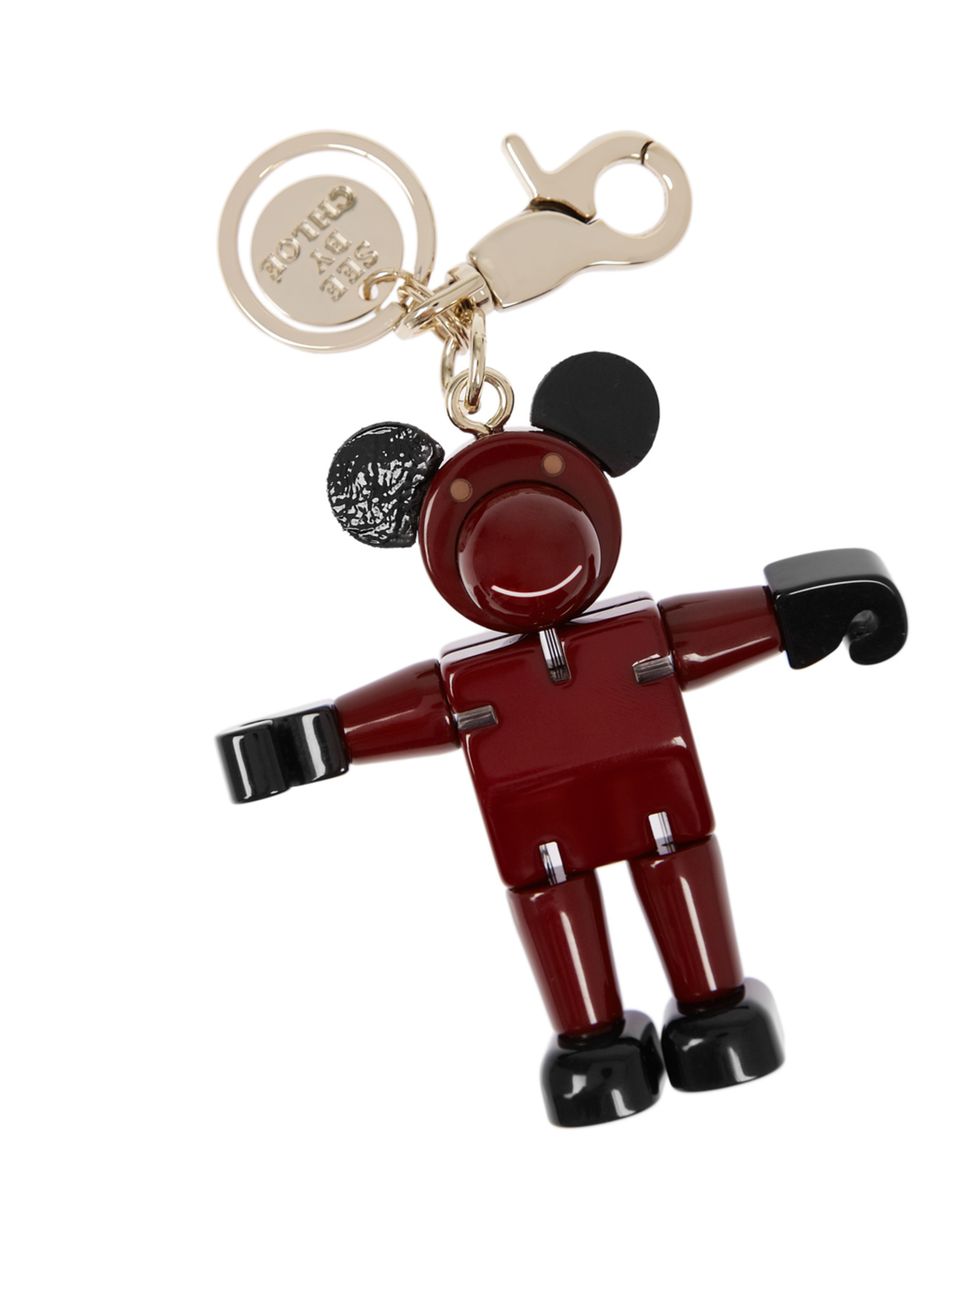 <p>See by Chloe Monkey Business keys accessory, £95, at <a href="http://www.net-a-porter.com/product/318284">Net-A-Porter</a></p>